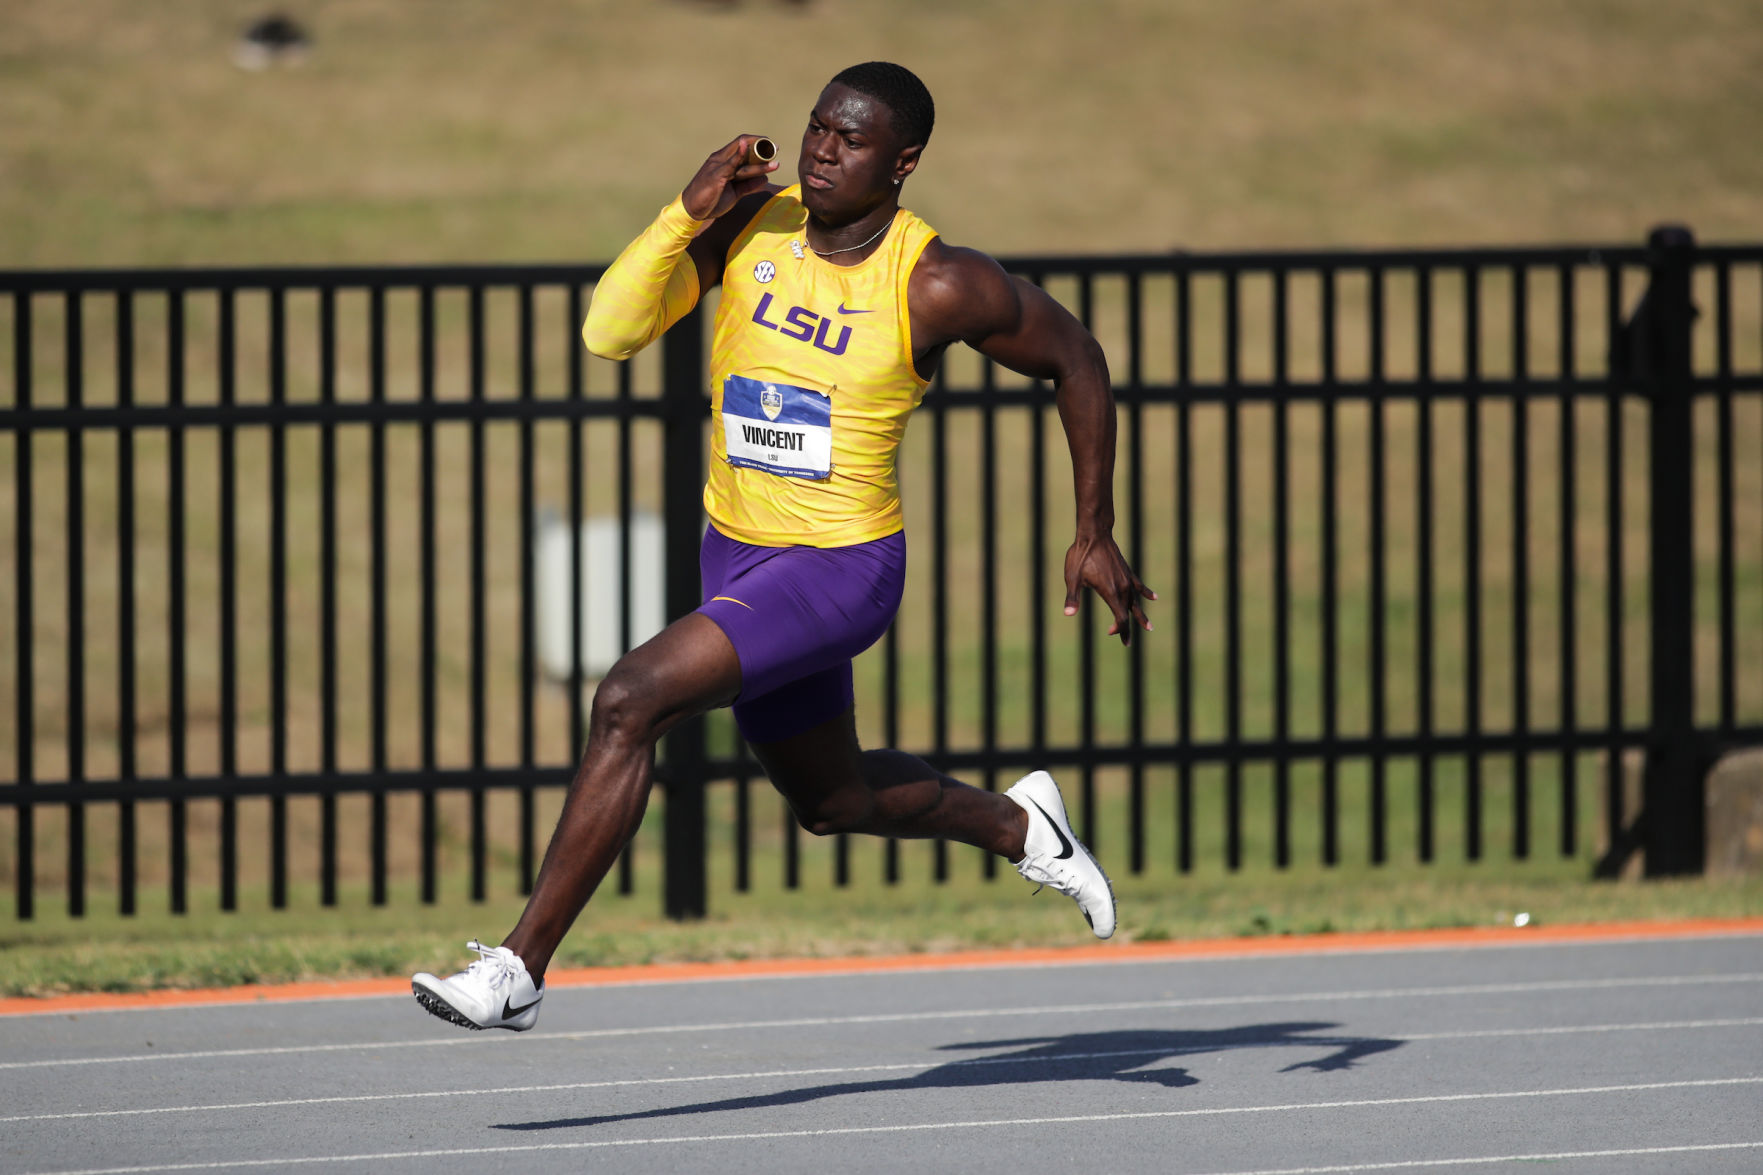 LSU's Kary Vincent is on the verge of 